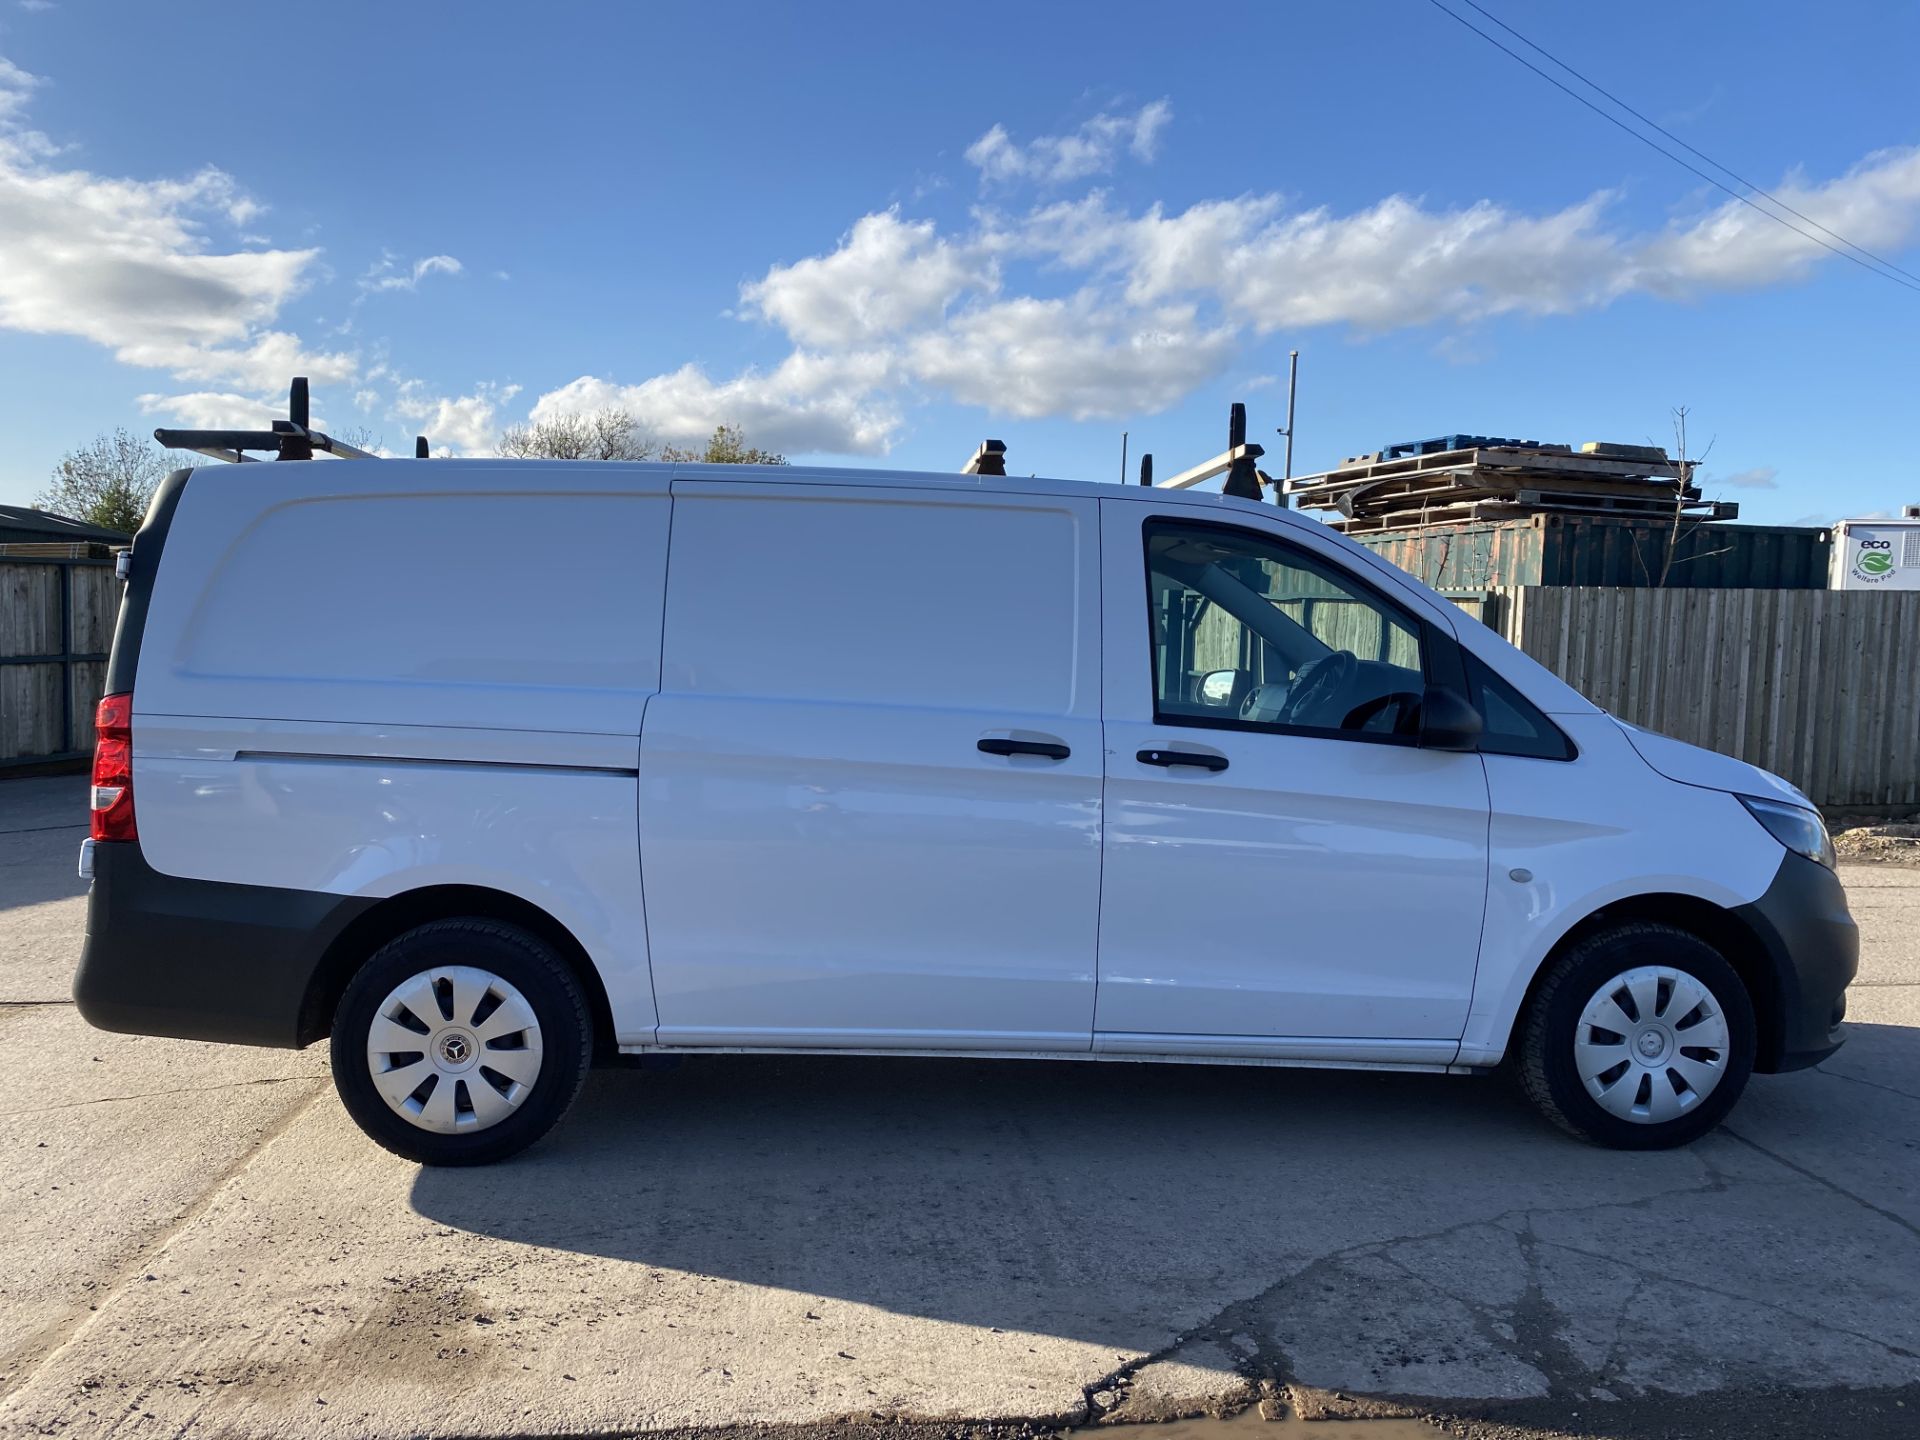 ON SALE MERCEDES VITO 114CDI BLUETEC "LWB" (EURO 6) 2018 MODEL - AIR CON - 1 KEEPER - LOOK!! - Image 6 of 19